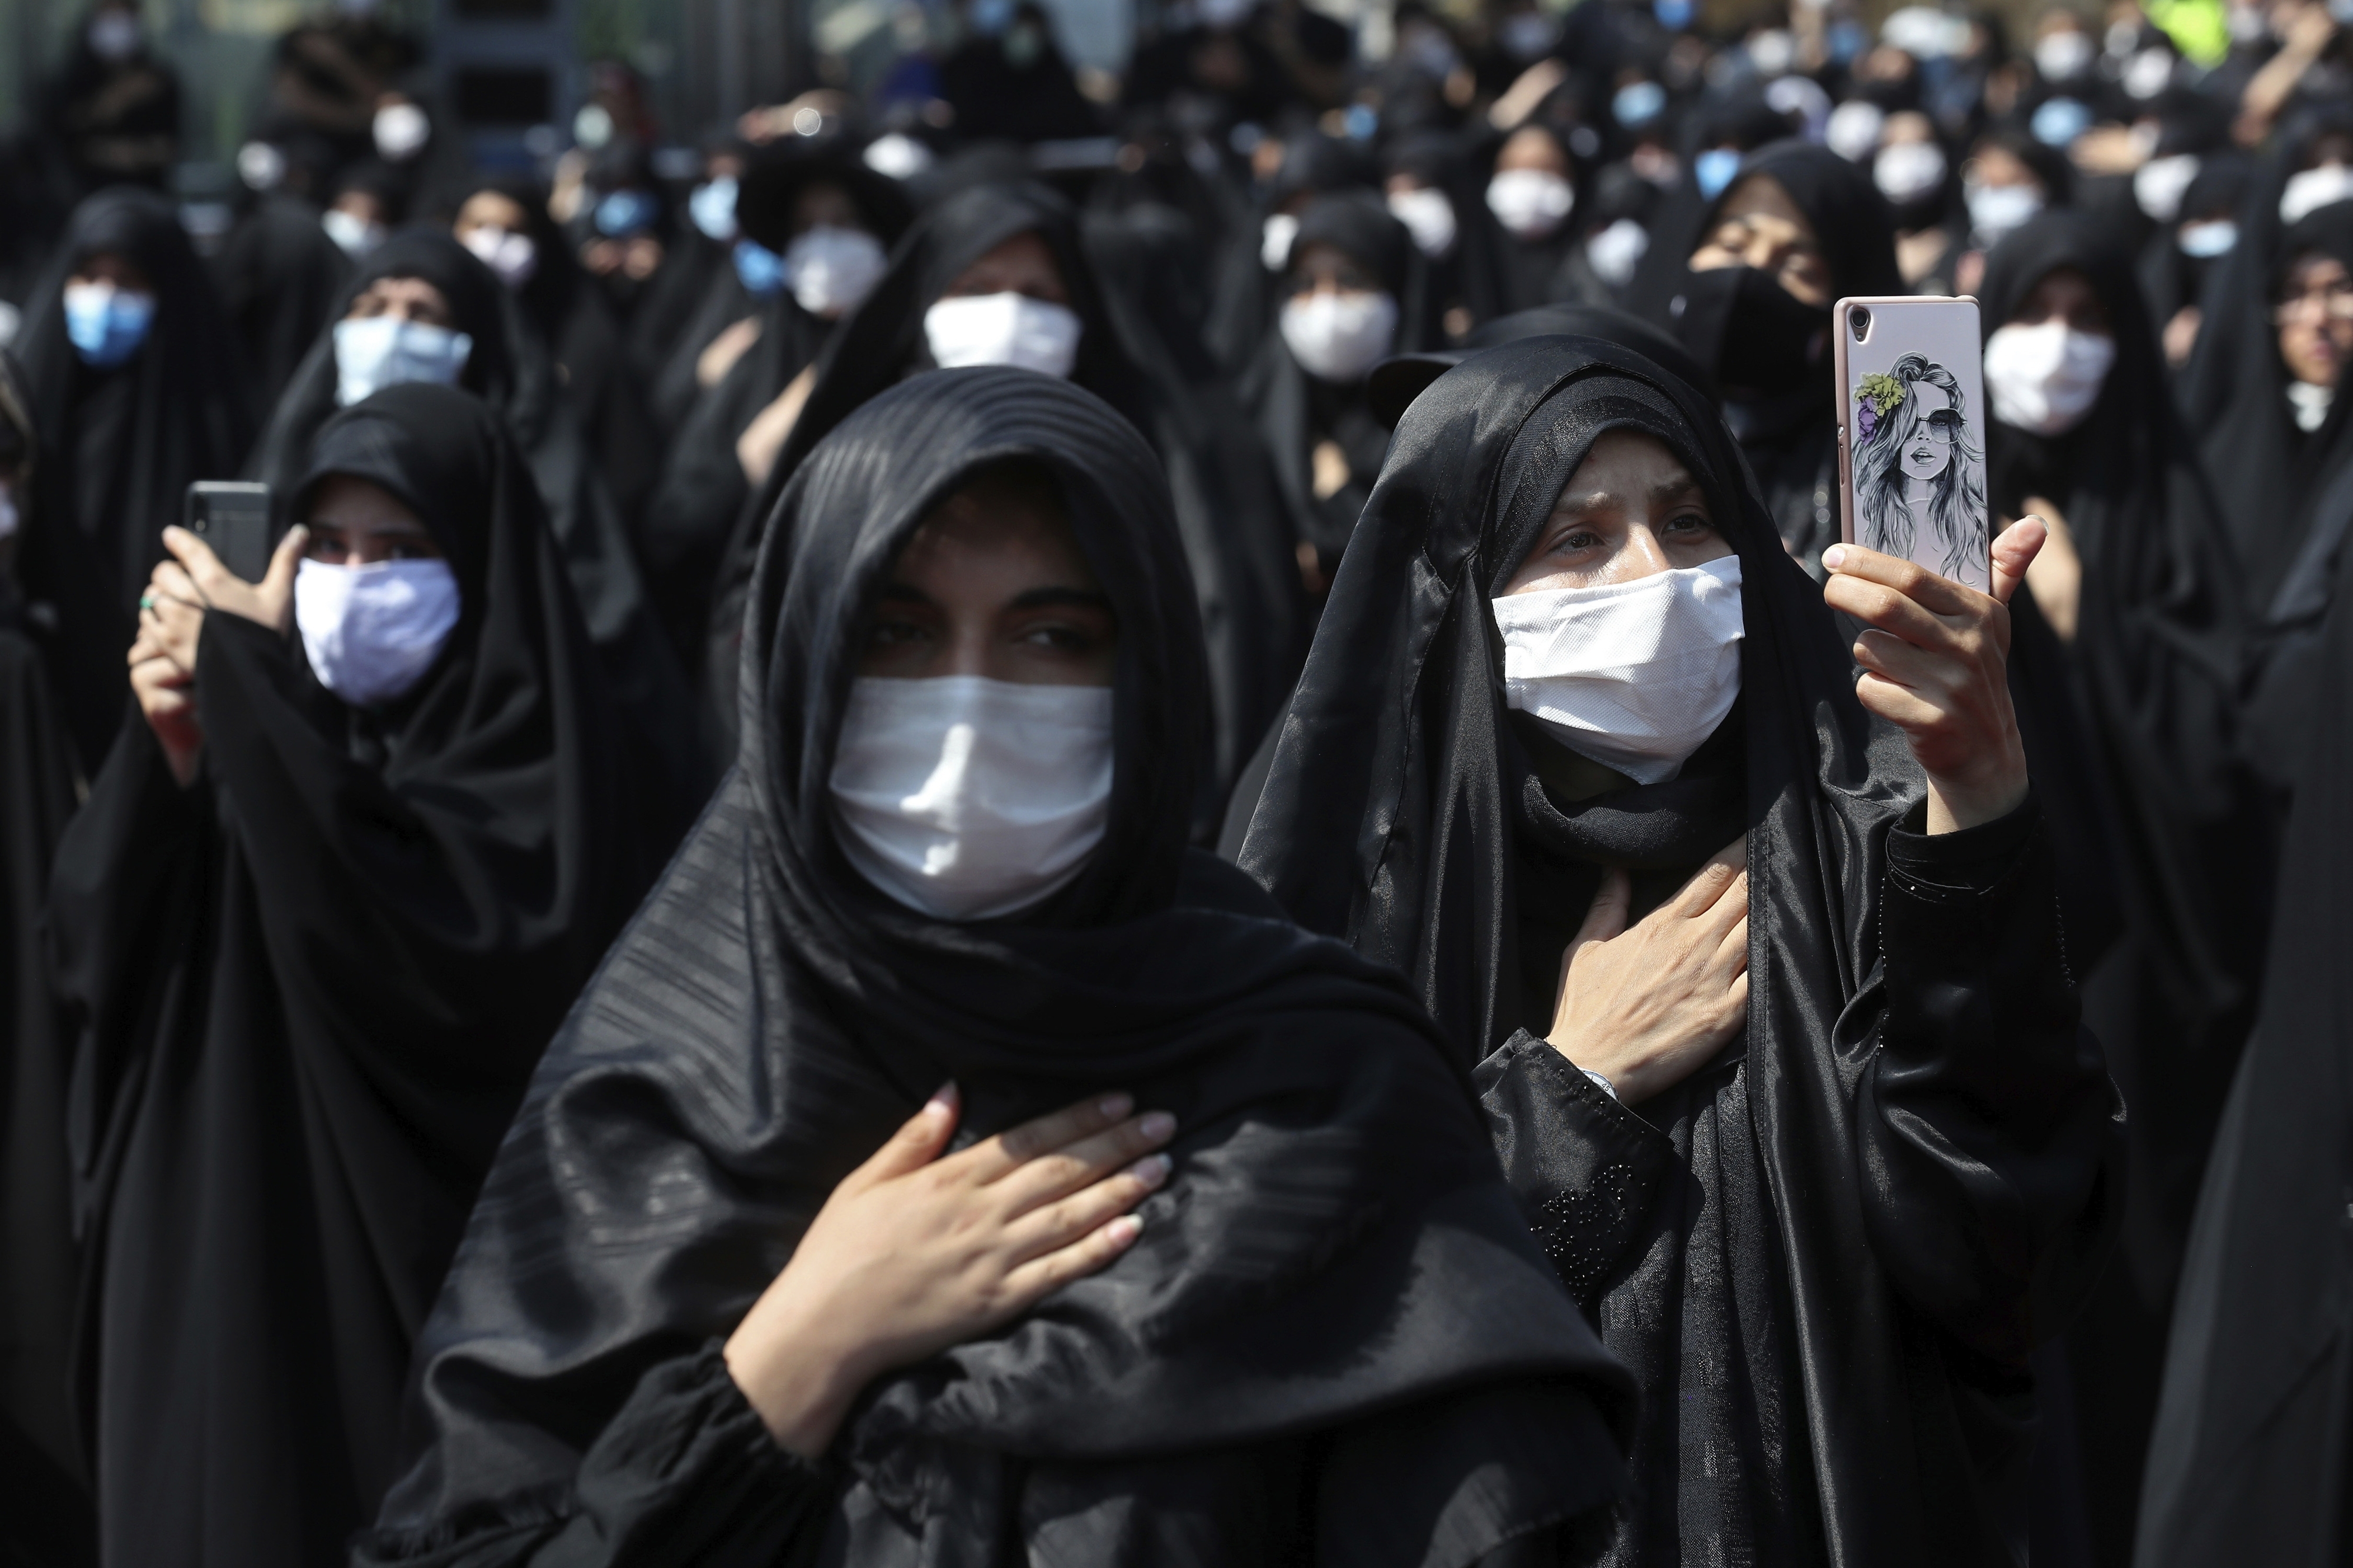 Iran FILE - In this Sunday, Aug. 30, 2020 file photo, people wearing protective face masks to help prevent spread of the coronavirus mourn during an annual ceremony commemorating Ashoura in Tehran, Iran. The confirmed death toll from the coronavirus has gone over 50,000 in the Middle East as the pandemic continues. That's according to a count Thursday, Sept. 3, 2020, from The Associated Press, based on official numbers offered by health authorities across the region. (AP Photo/Ebrahim Noroozi, File)